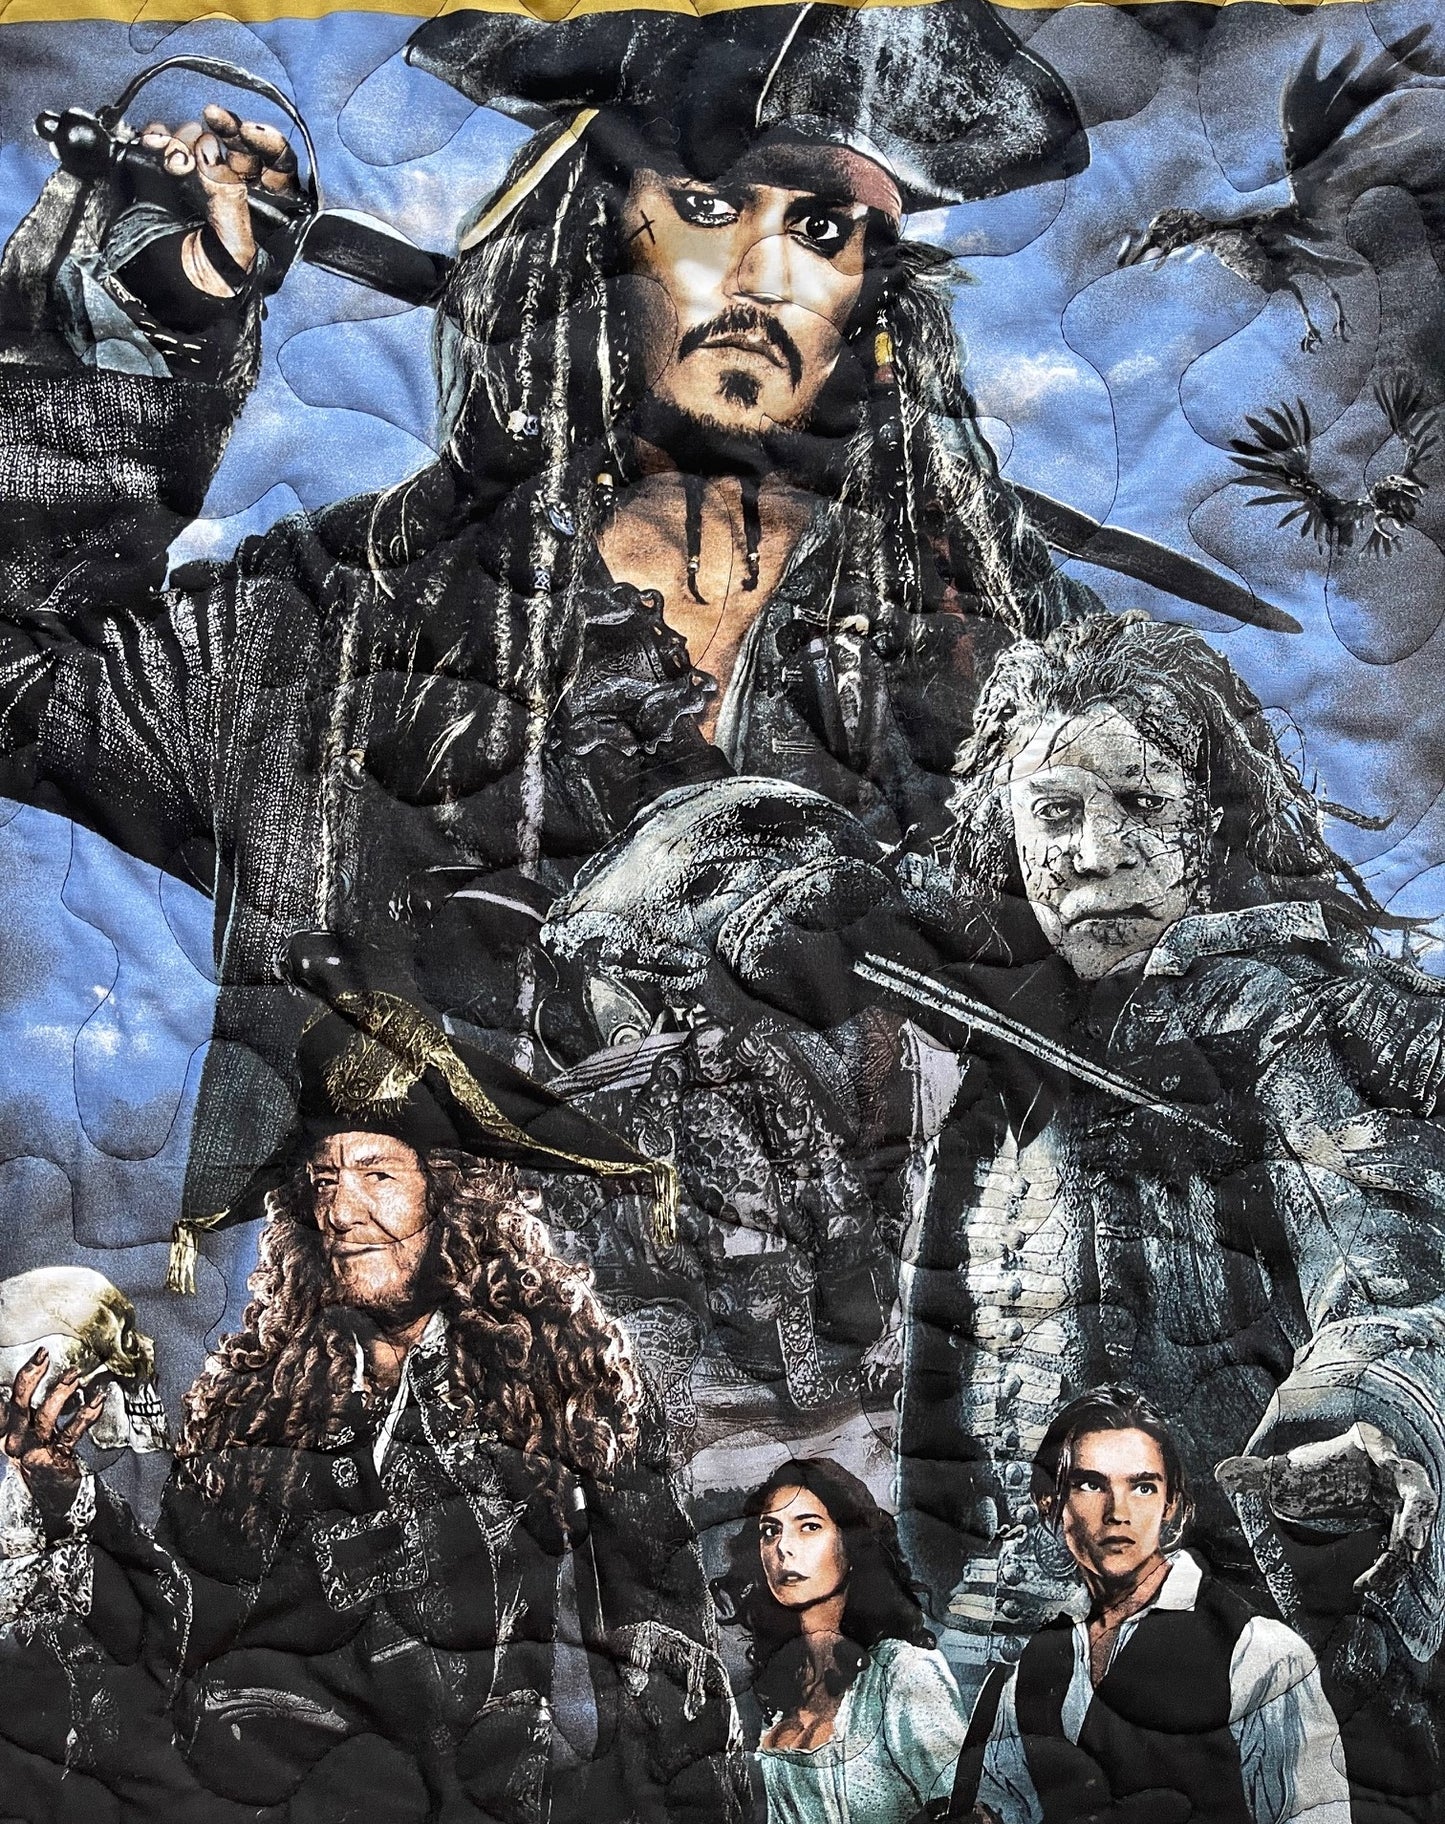 PIRATES OF THE CARIBBEAN "DEAD MEN TELL NO TALES" JACK SPARROW BACKING QUILTED BLANKET